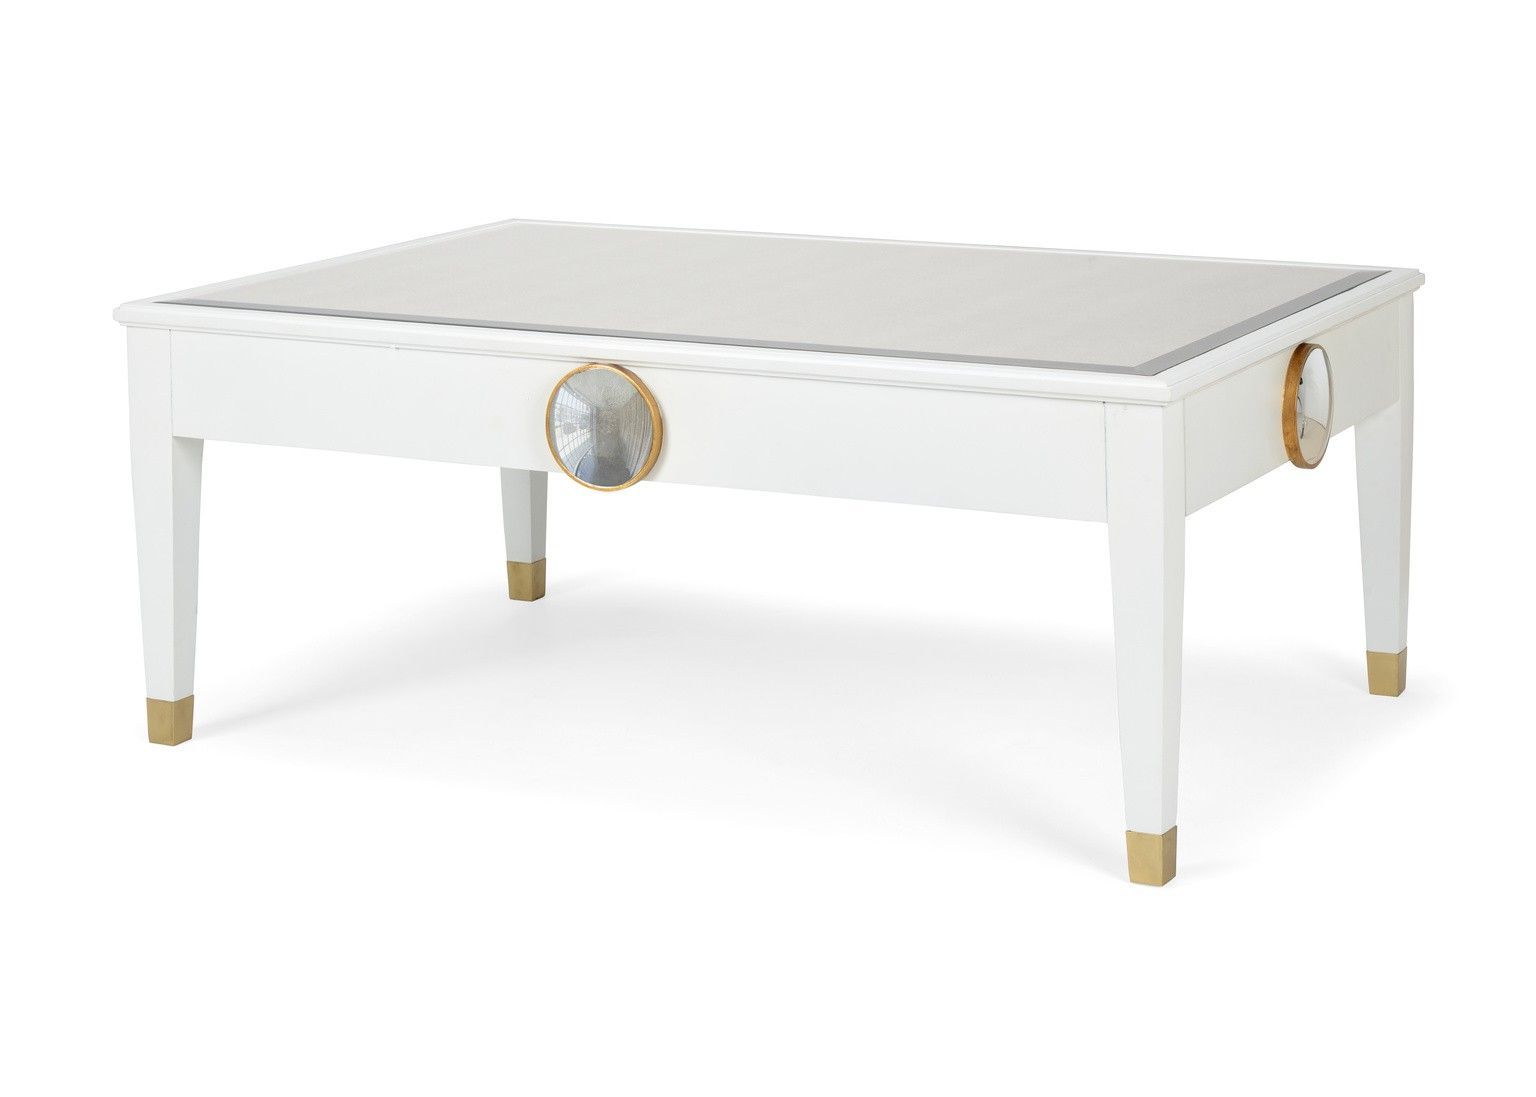 White Cocktail Table With Brass Edged Mirror Accent And Regarding Most Recently Released Antique Mirror Cocktail Tables (View 10 of 20)